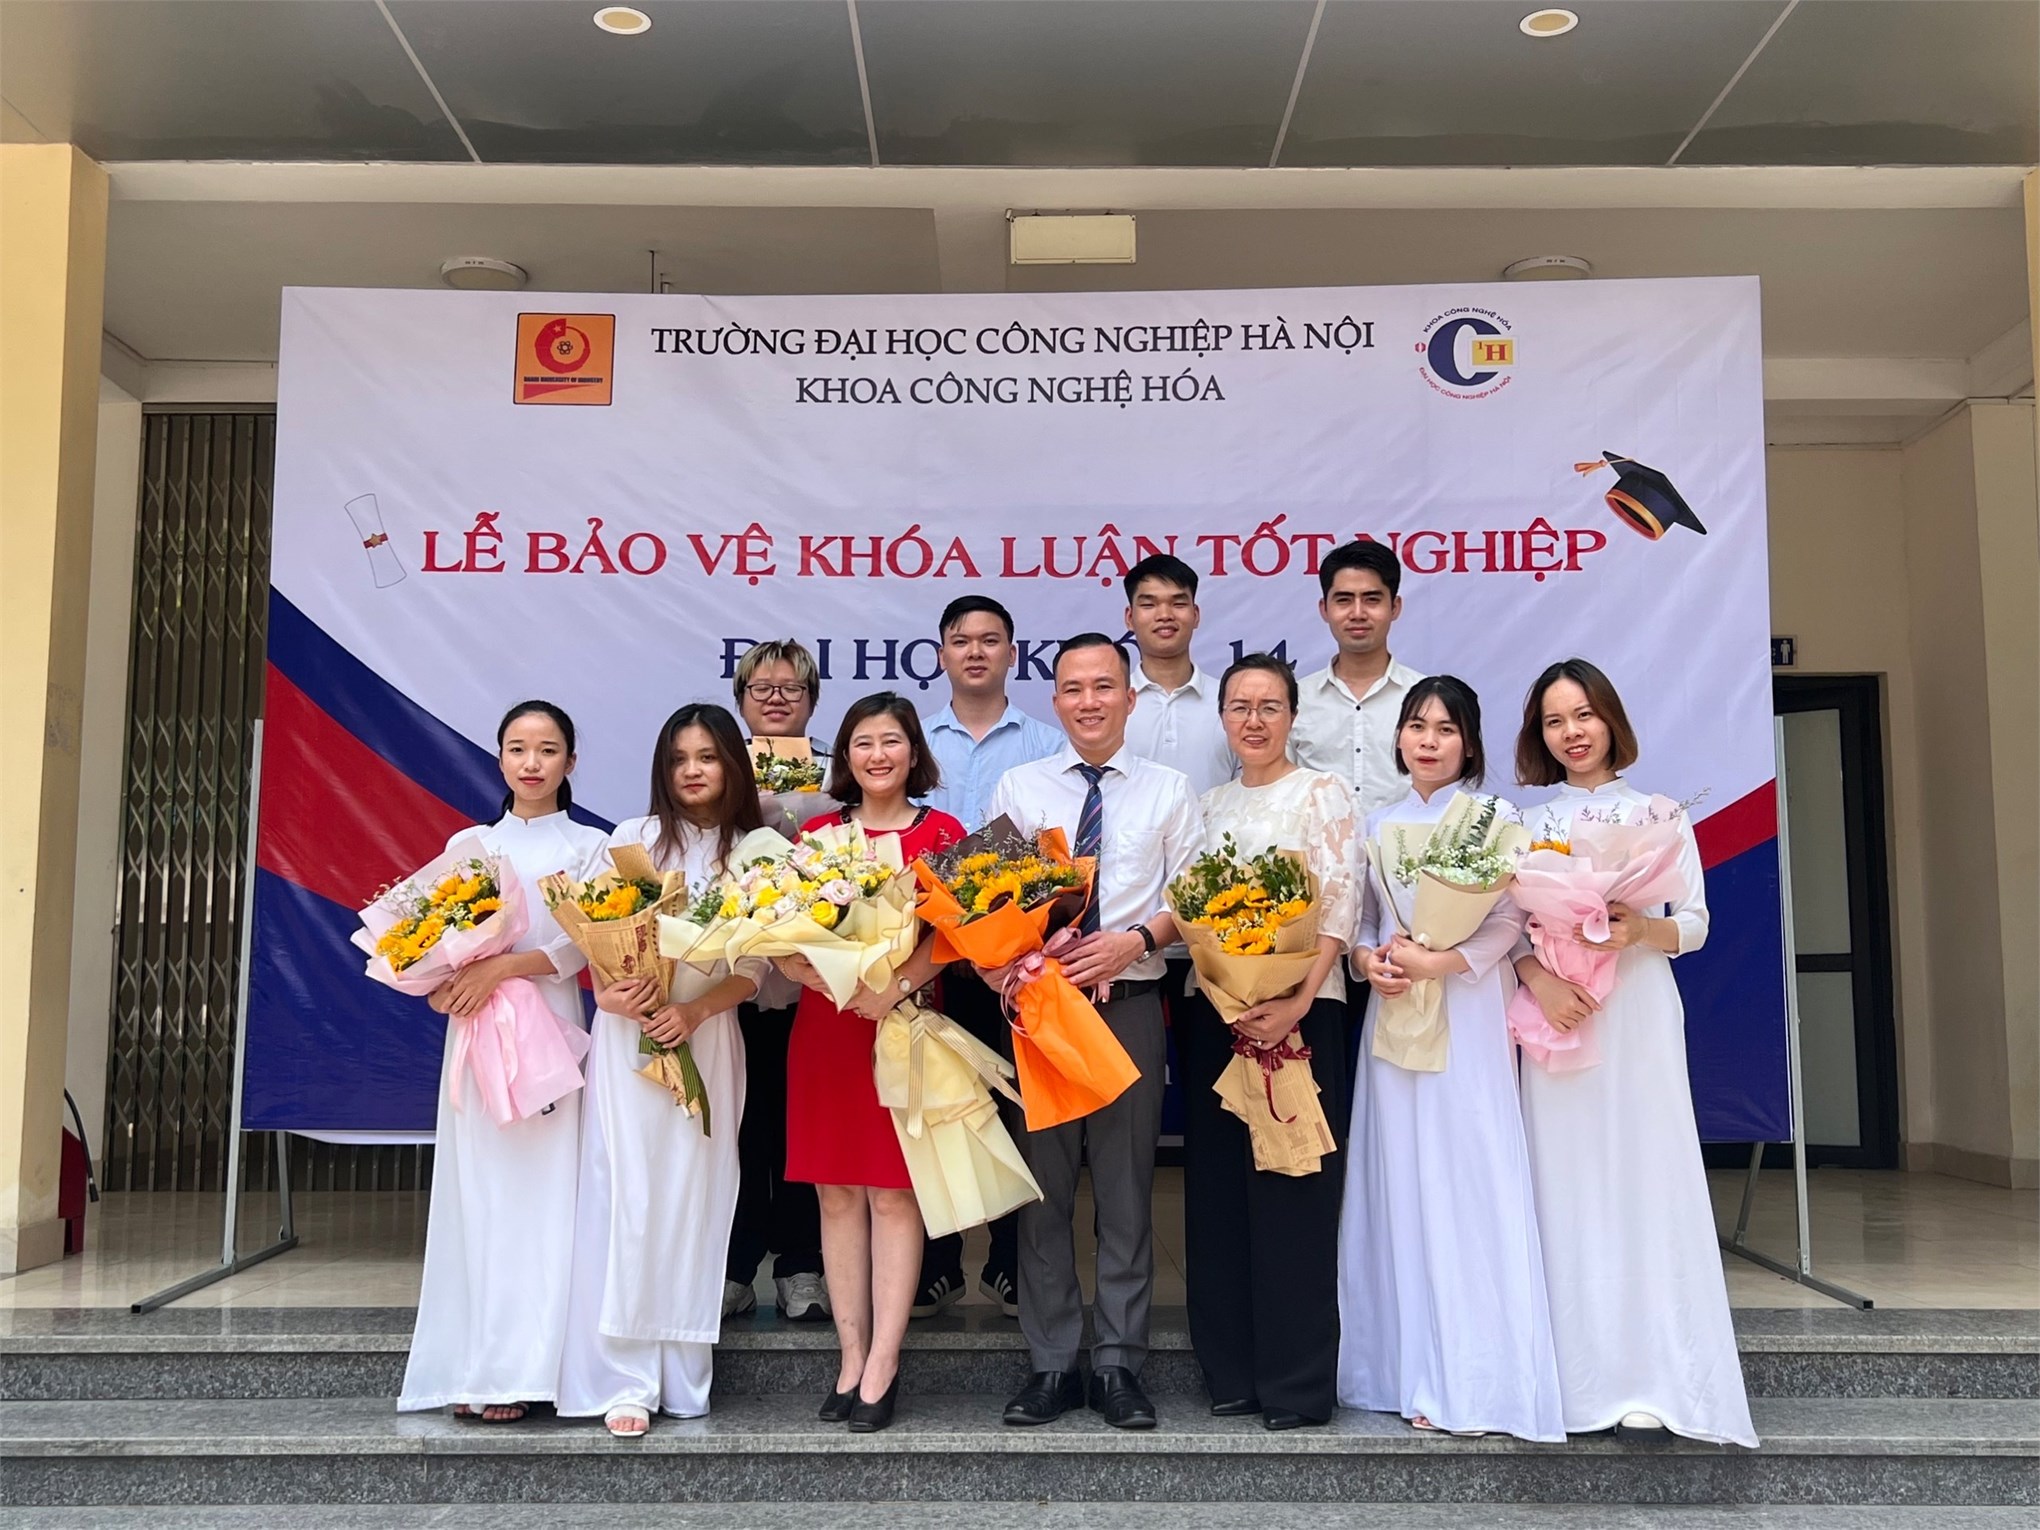 Graduation and the Summer Season: A Tapestry of Feelings at Hanoi University of Industry